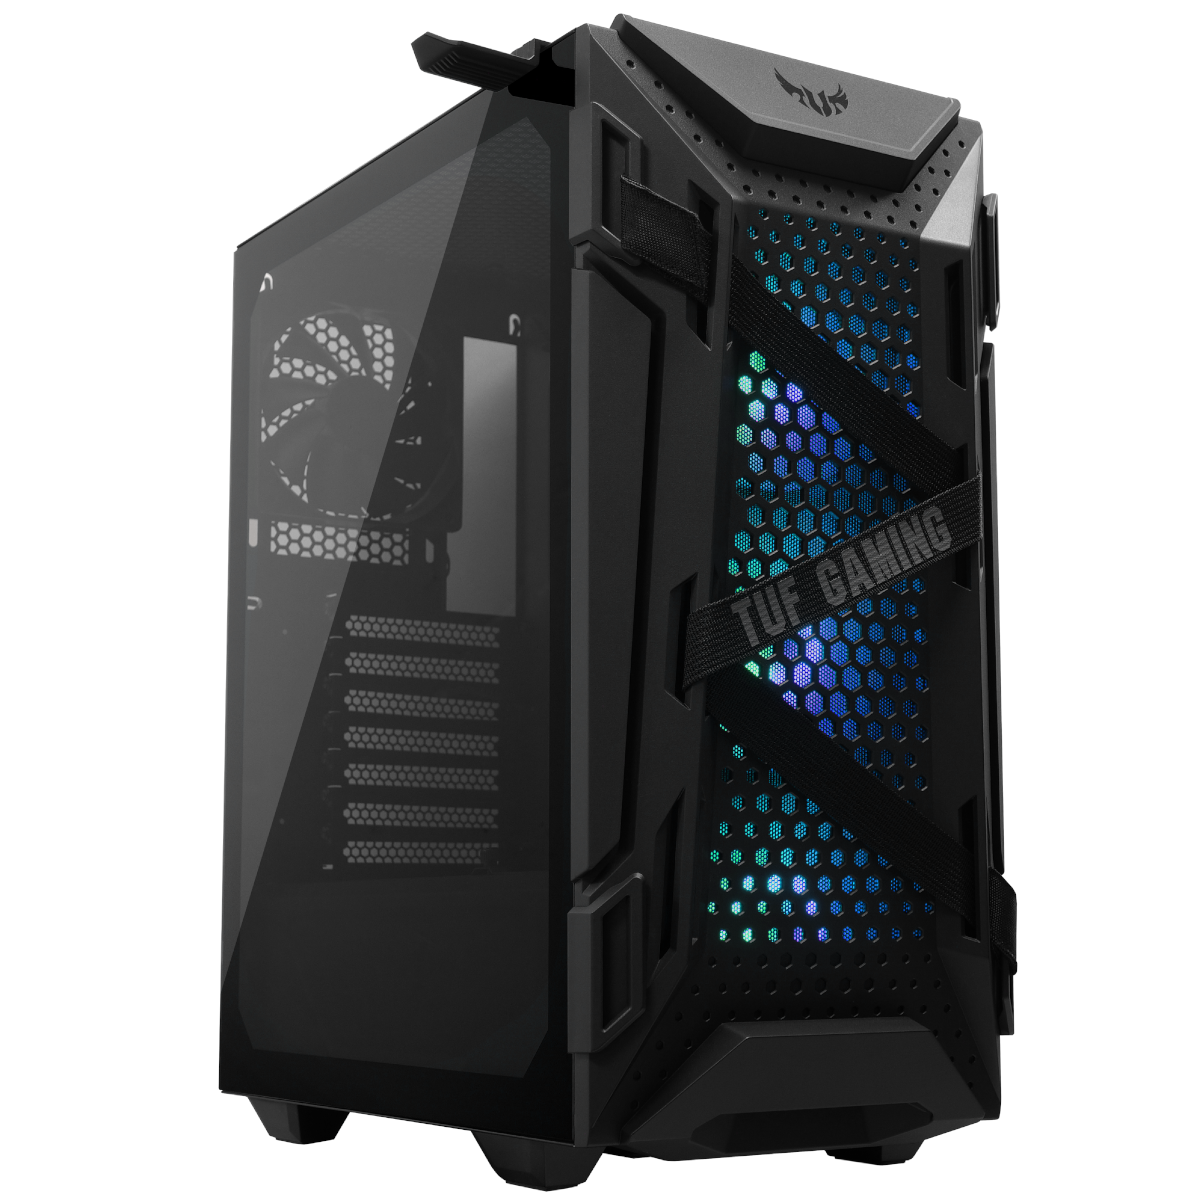 ASUS TUF Gaming GT301 Midi-Tower Case - Black Tempered Glass